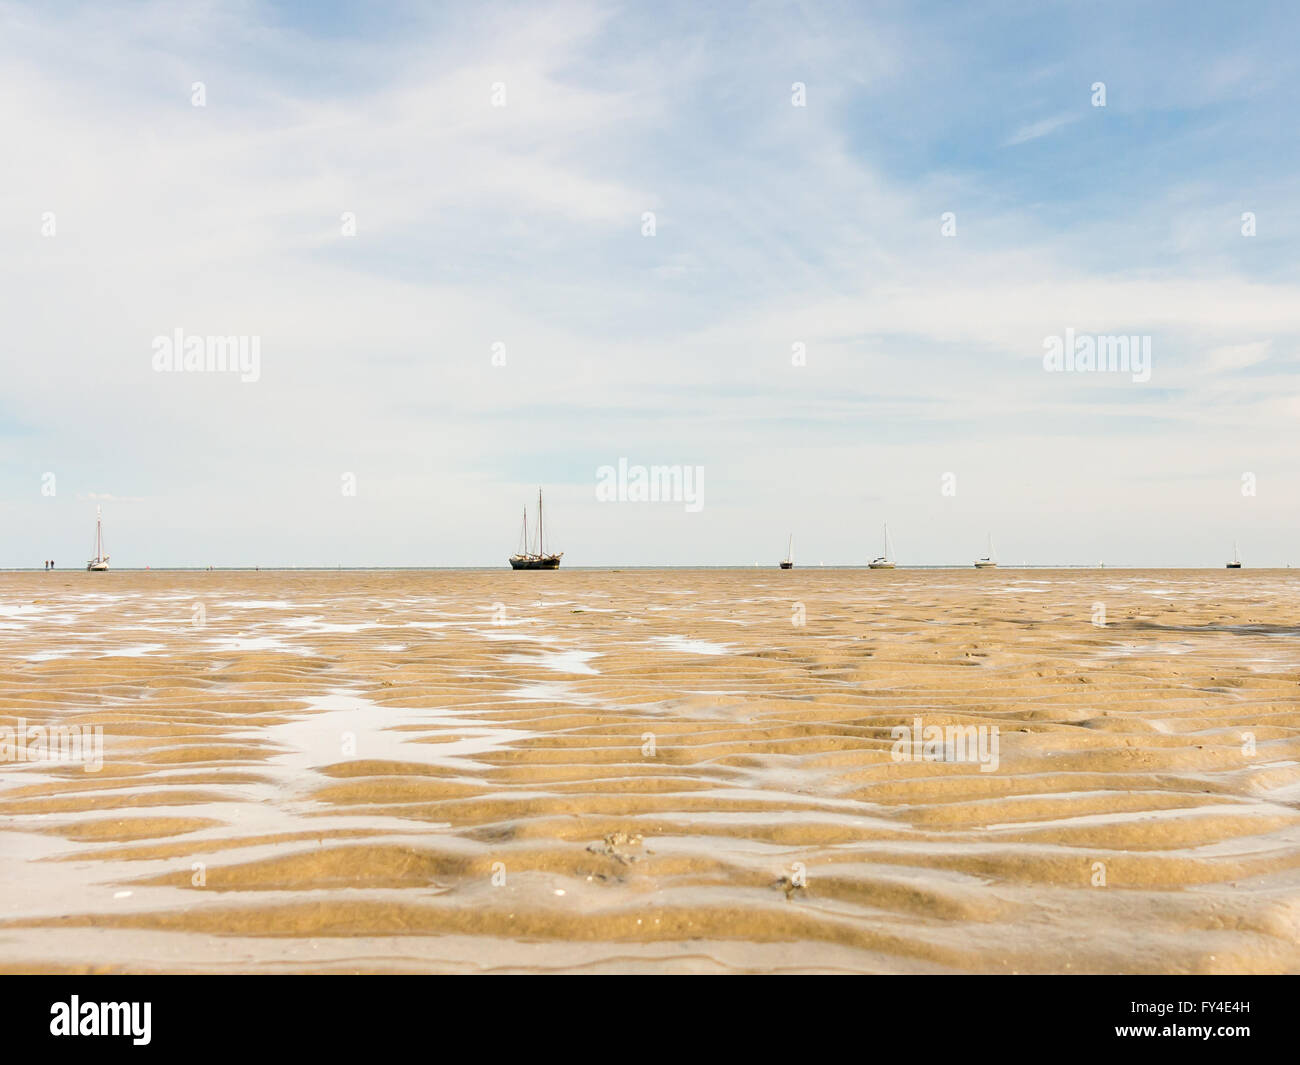 Sandflats at low tide, the wetlands of the Dutch Waddensea, Netherlands Stock Photo